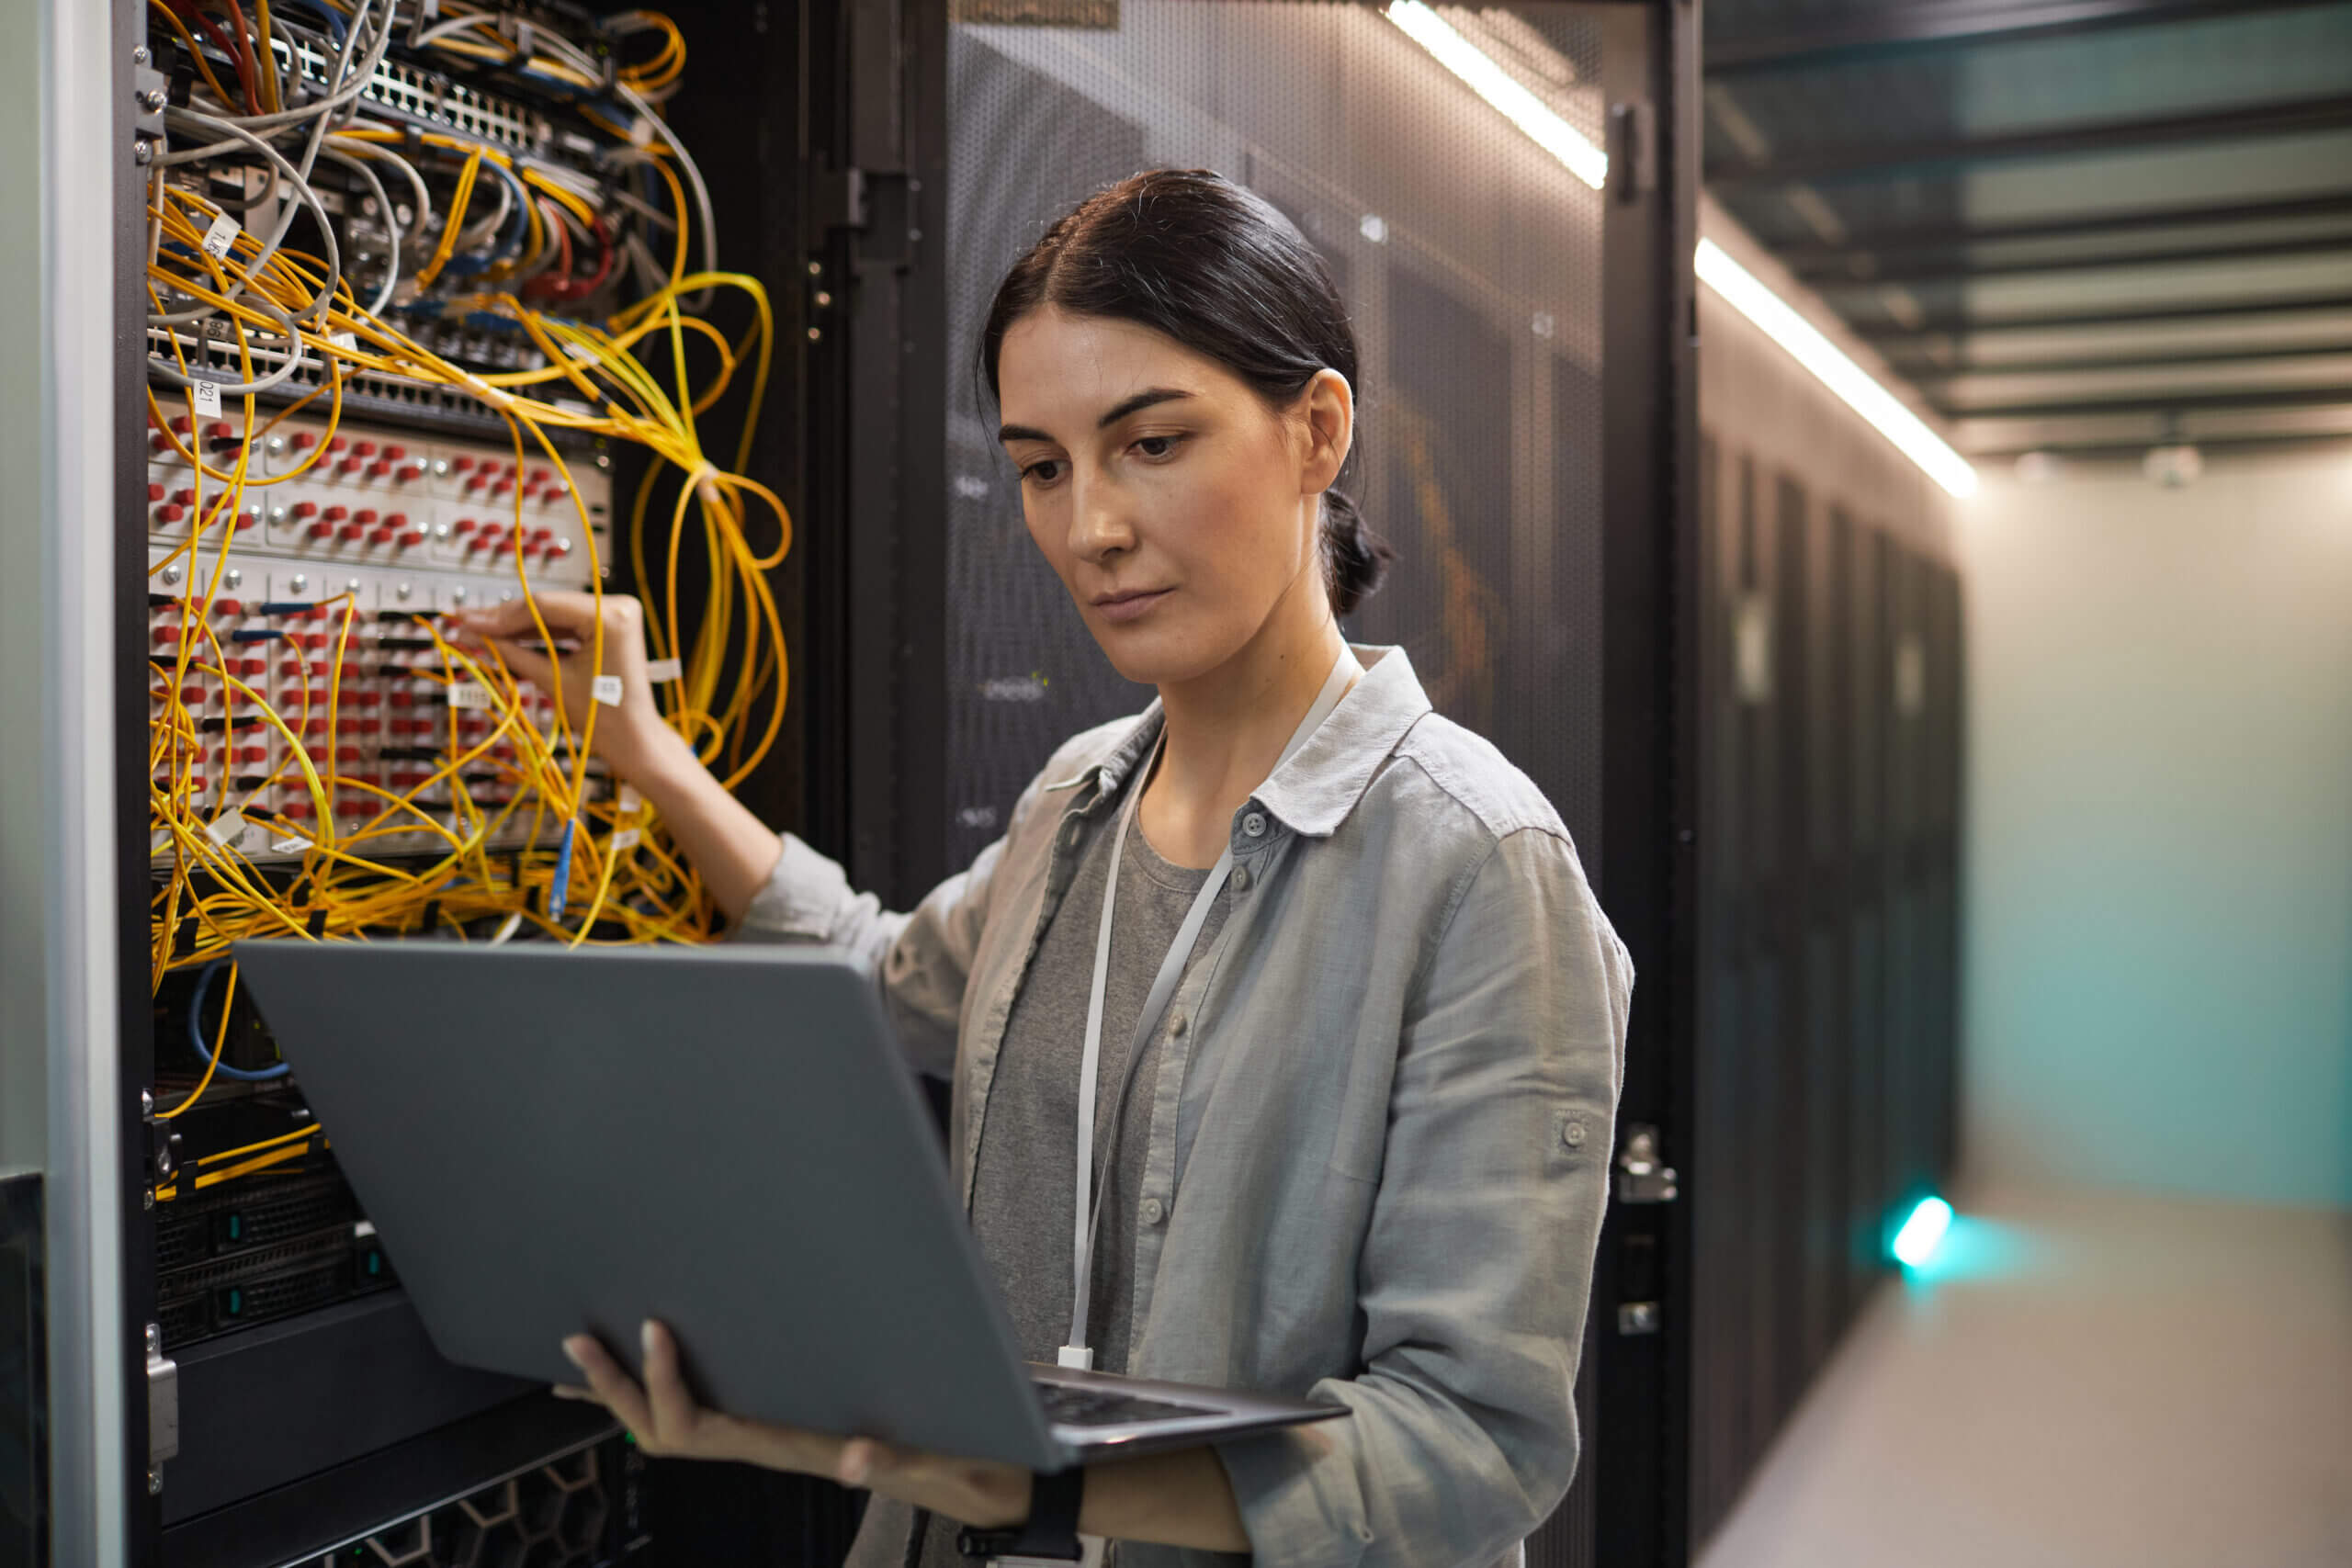 FA Female network engineer connecting cables in server cabinet while working with a supercomputer in the data center.